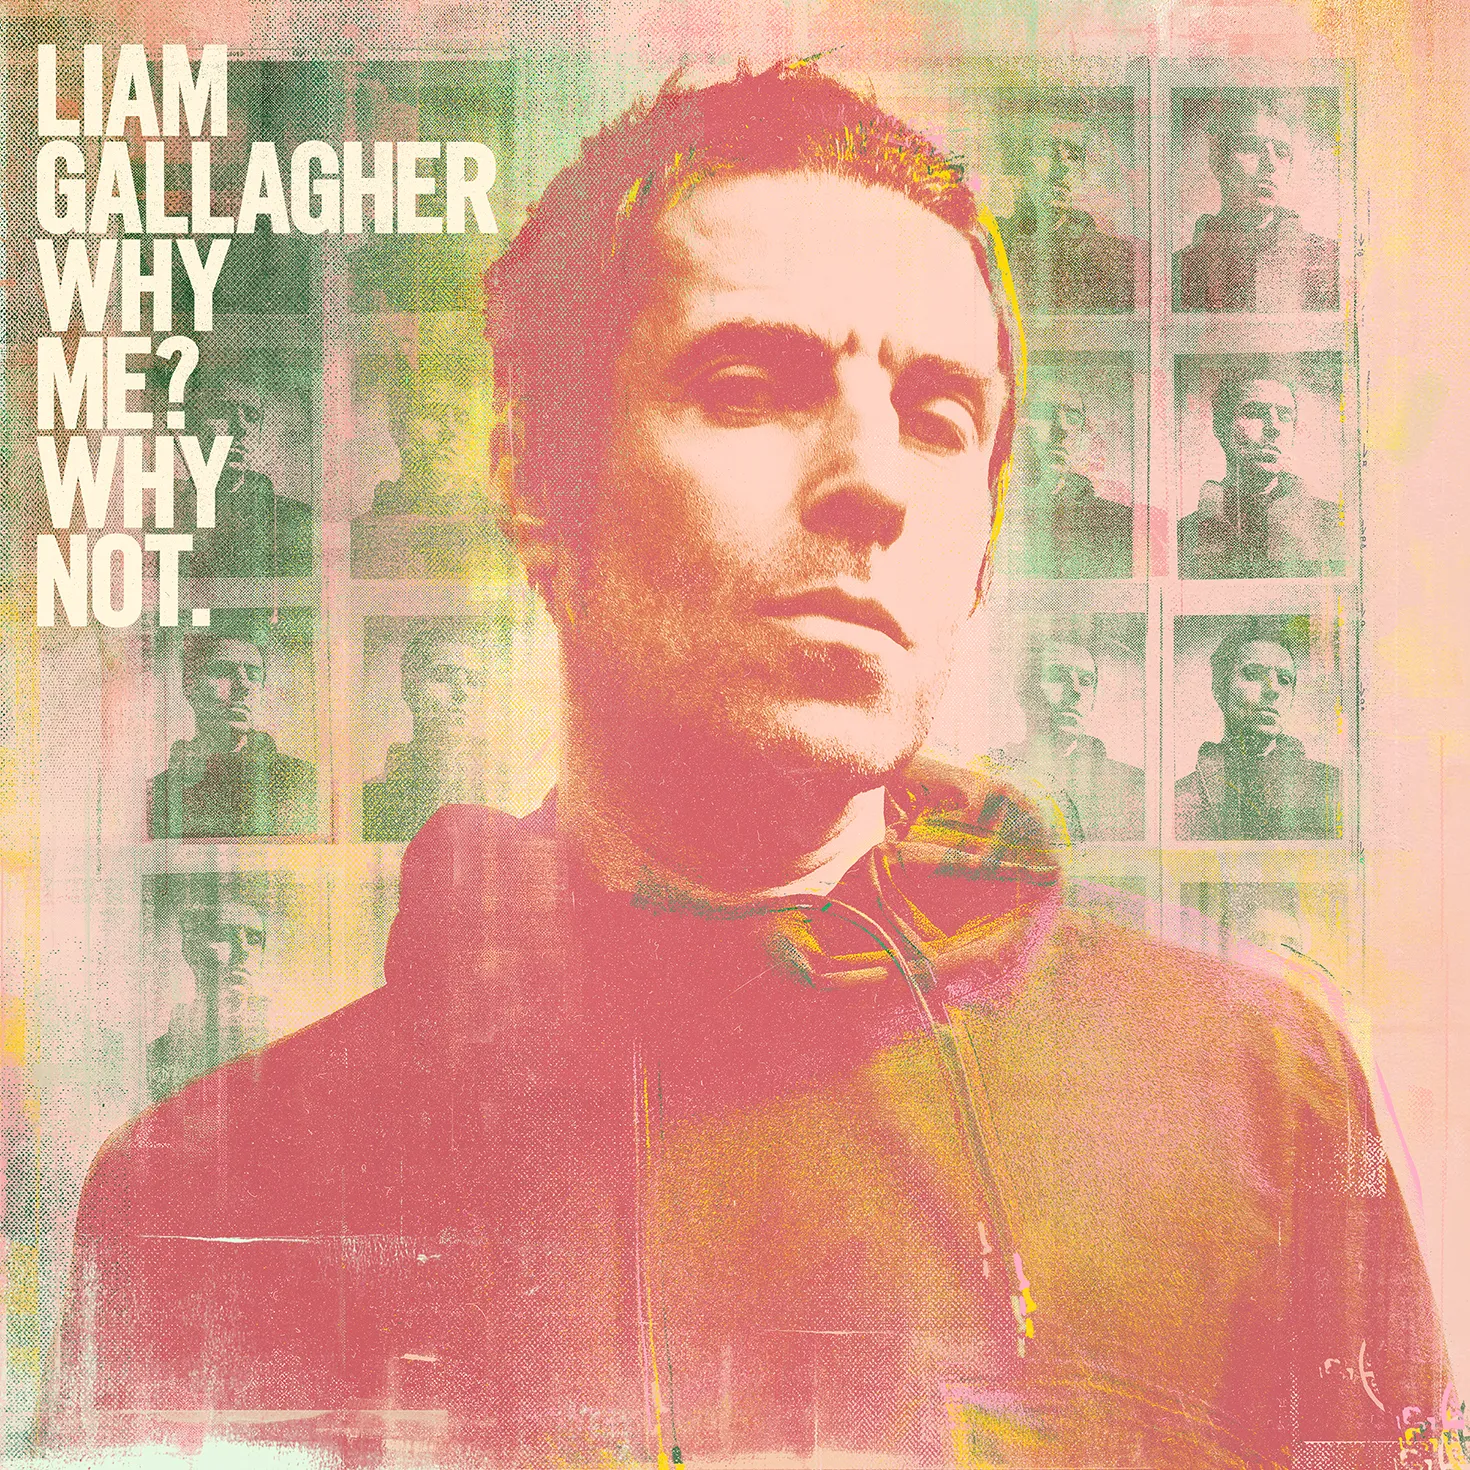 Liam Gallagher - Why Me? Why Not. artwork